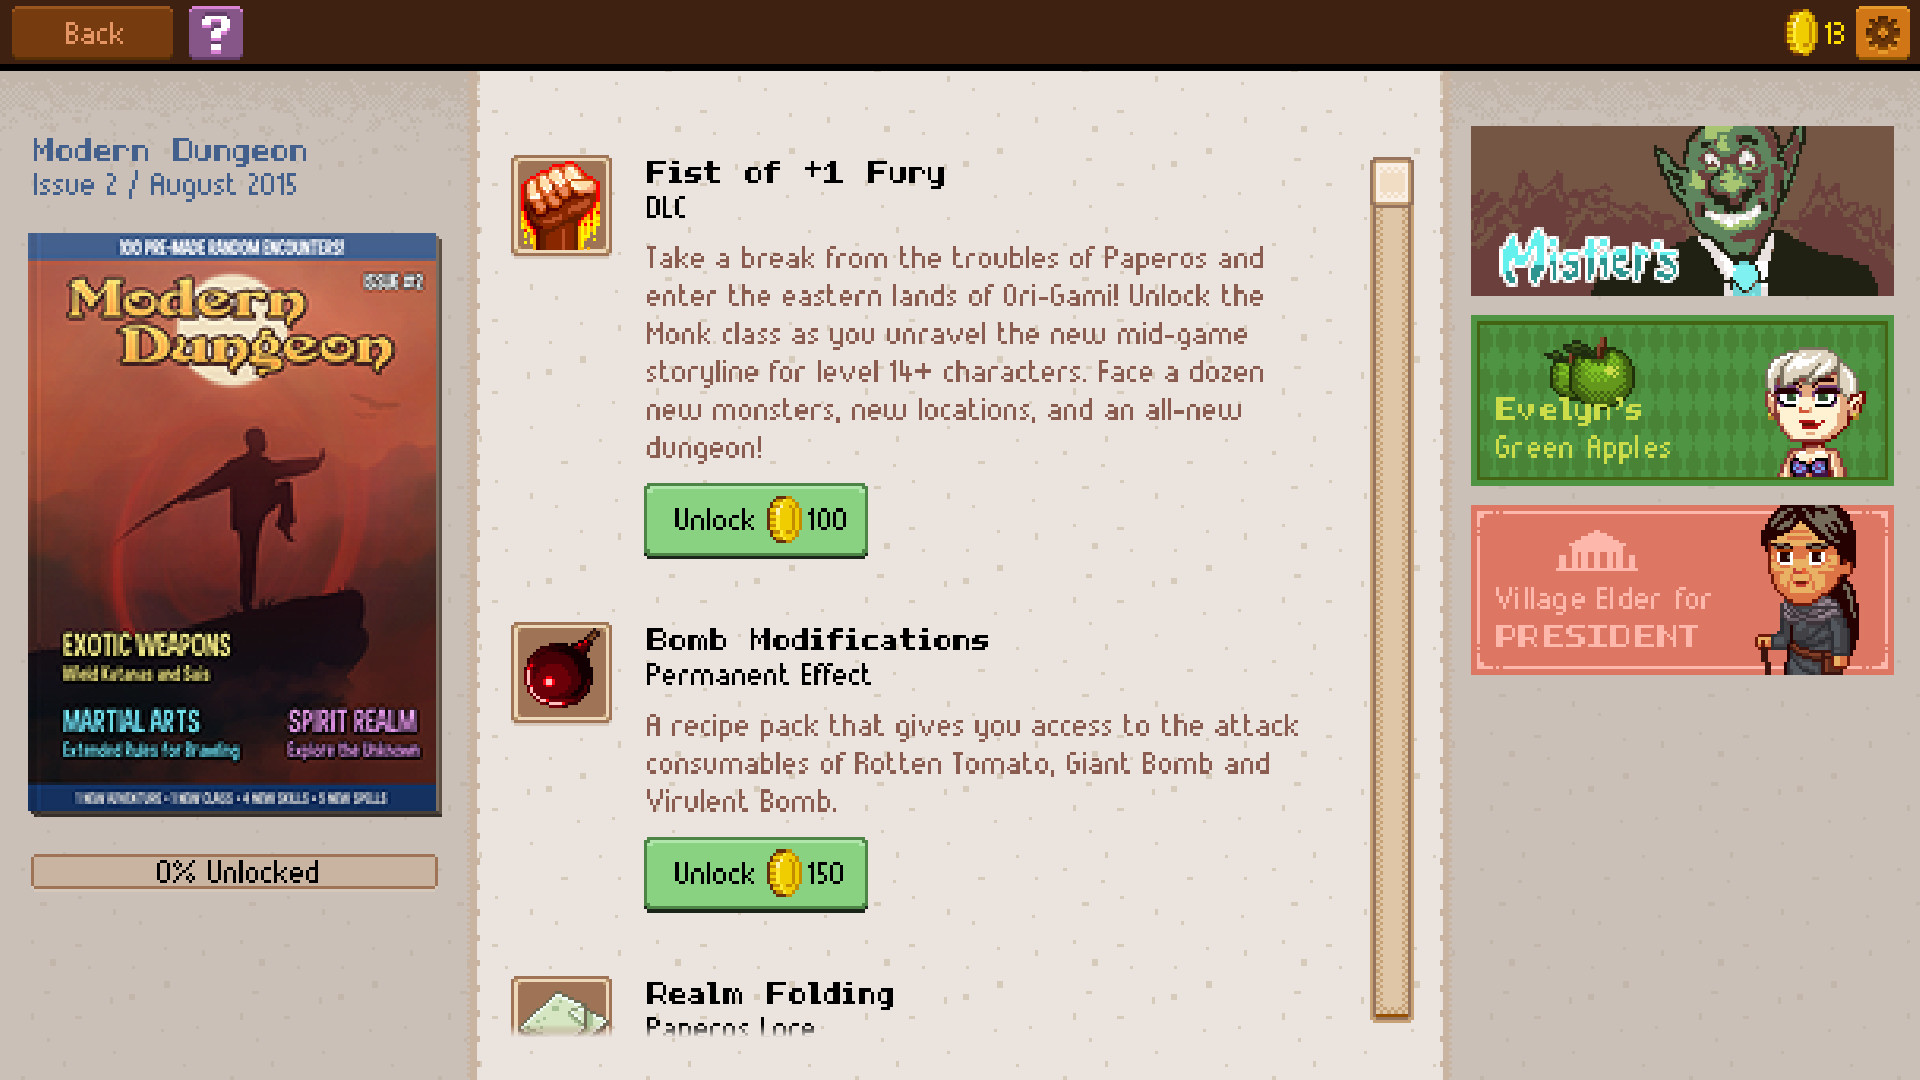 Knights of Pen and Paper 2 screenshot